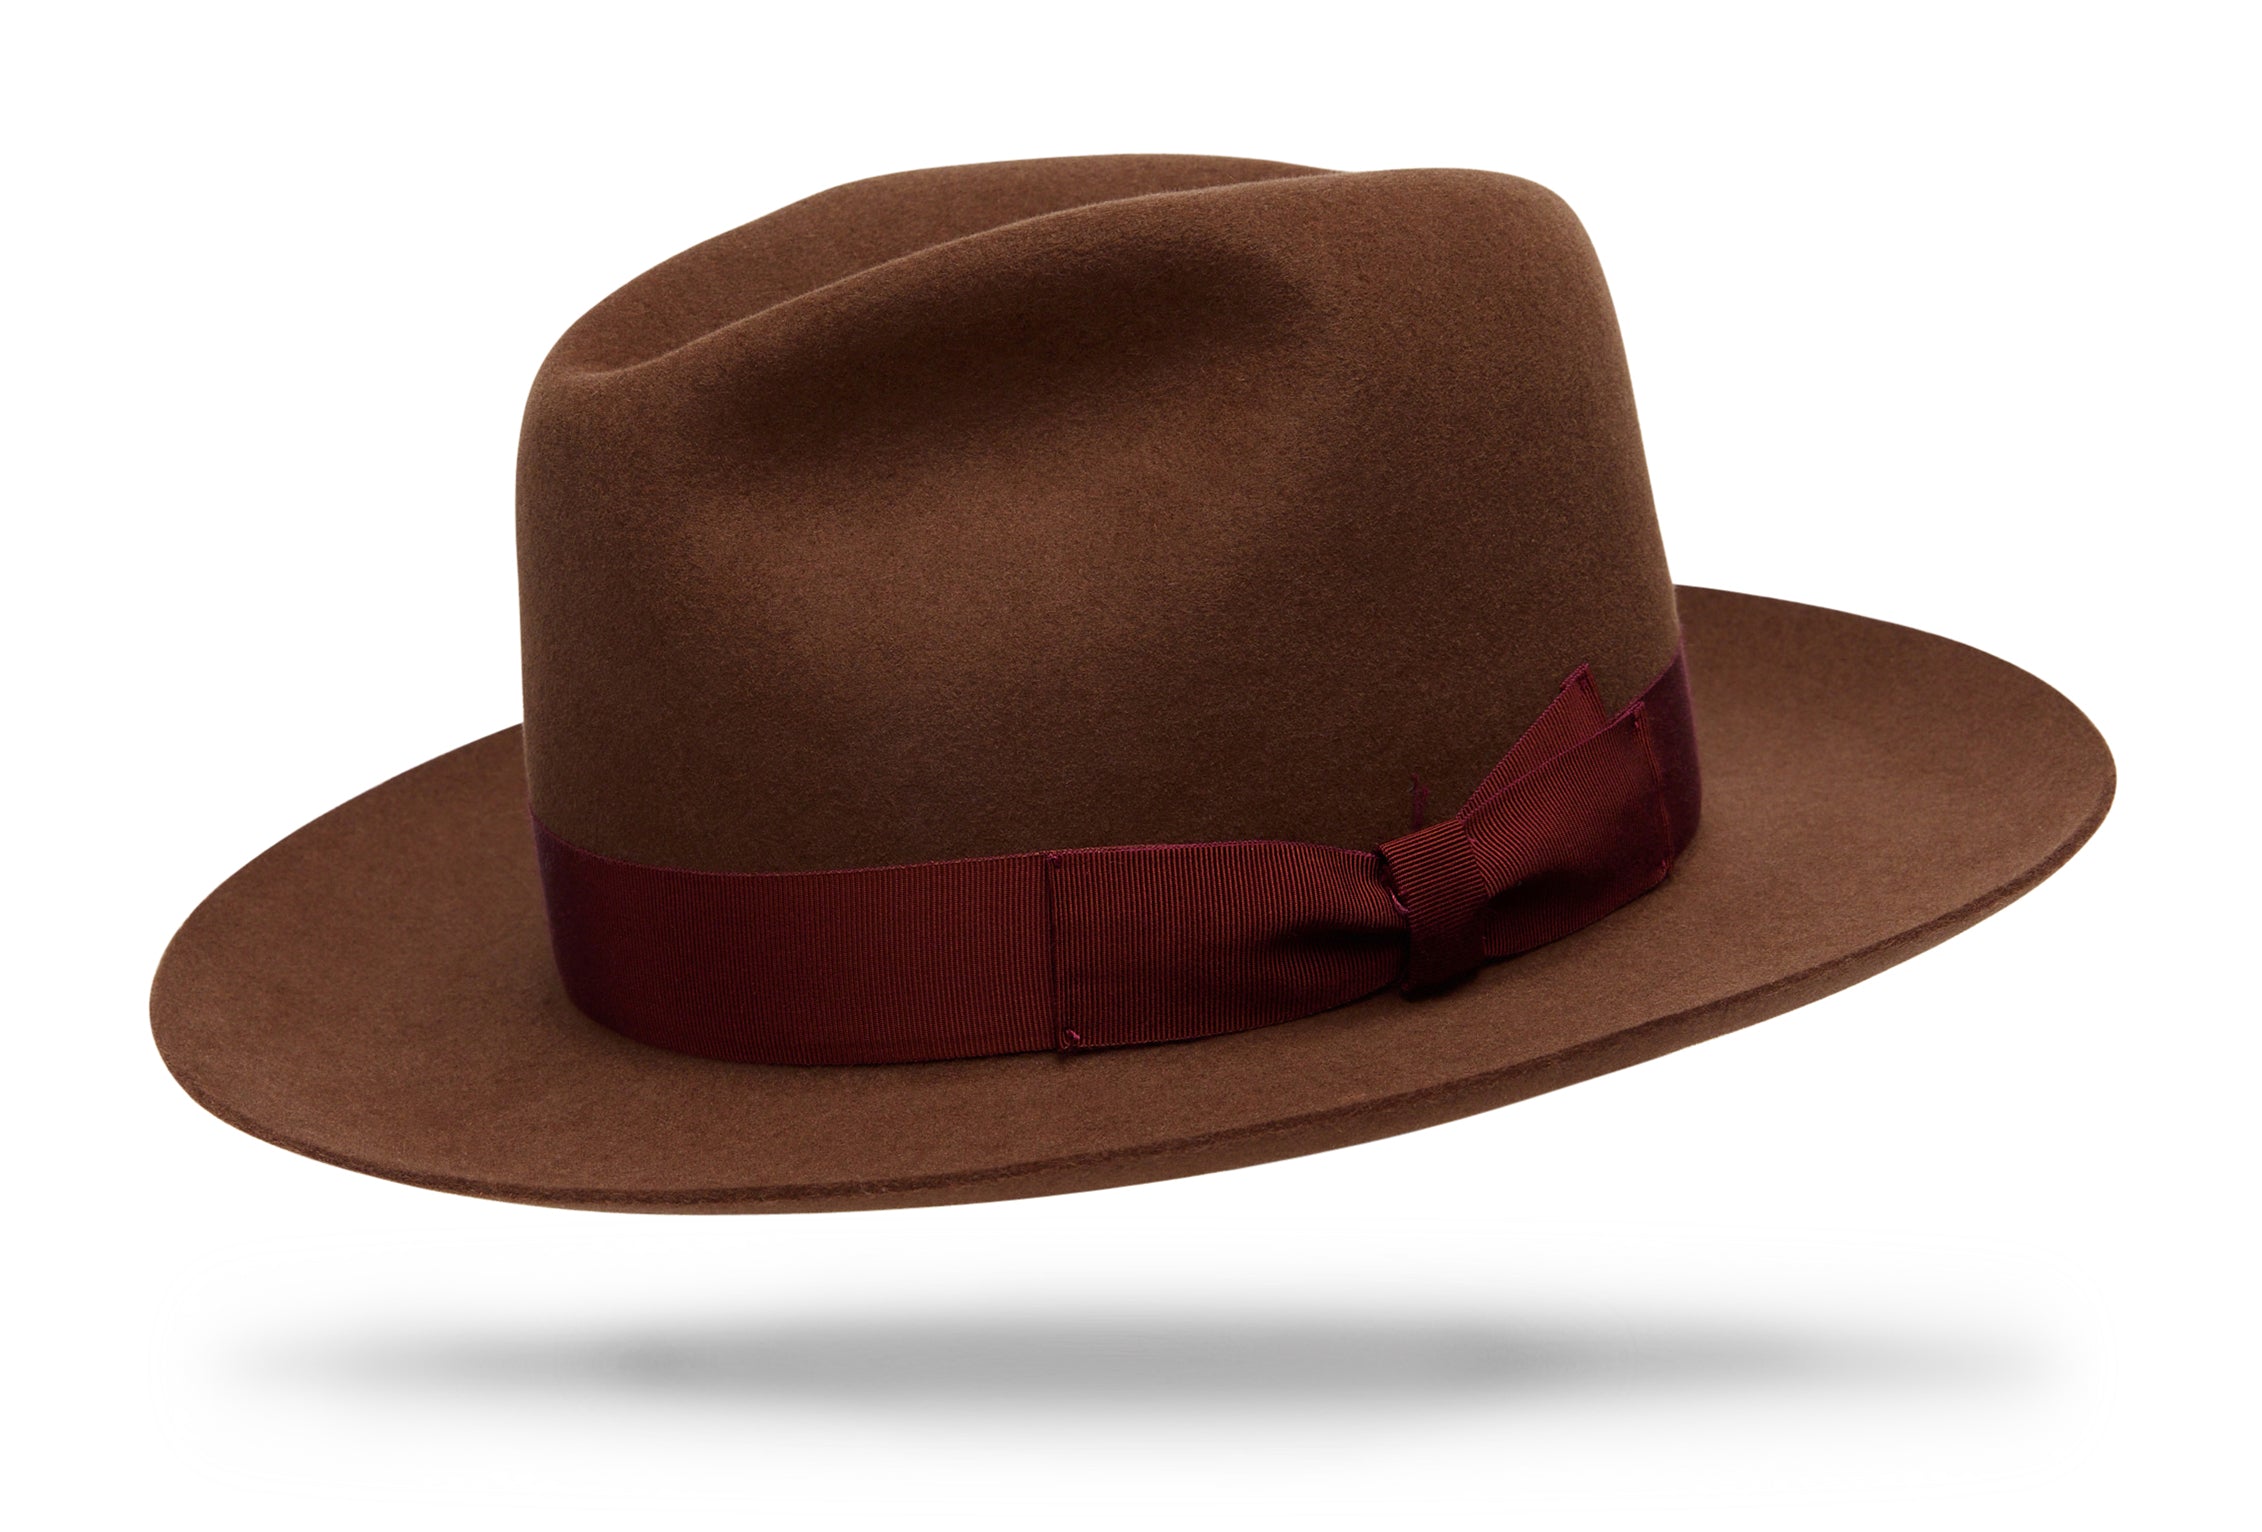 
Design
Our new spin on our timeless classic, the Sienna carries a 4 C-crown and holds a 3 snap brim. Substantial enough to battle the elements and cool enough to hit the streets. Should be a staple in your wardrobe.
Material
Fur felt, sustainably acquired.
Specifications
A 115-gram fur felt beauty. The Sienna holds a 3 snap brim with a classic 4 C-crown. A refined cacao, harmonized with a rust double bow hatband.Handcrafted in our NYC atelier.